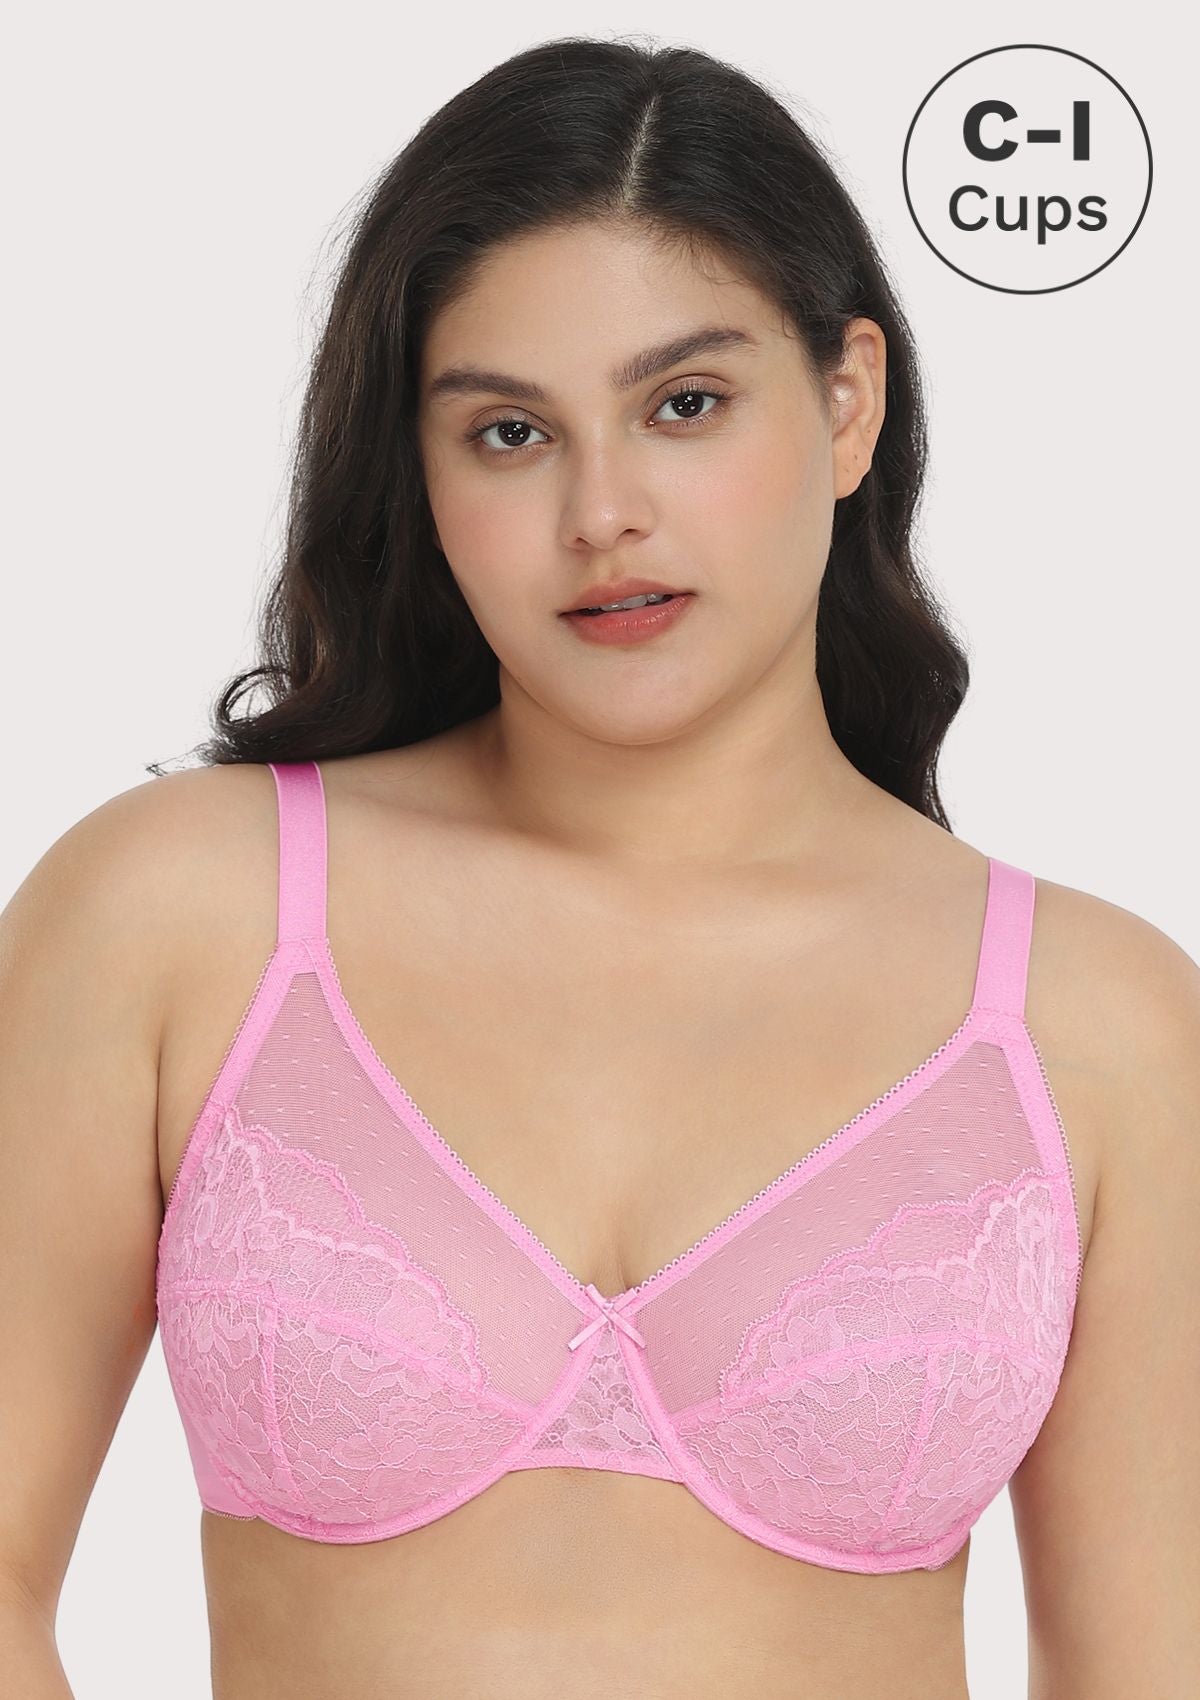 HSIA Enchante Lacy Bra: Comfy Sheer Lace Bra With Lift - Dusty Peach / 42 / G